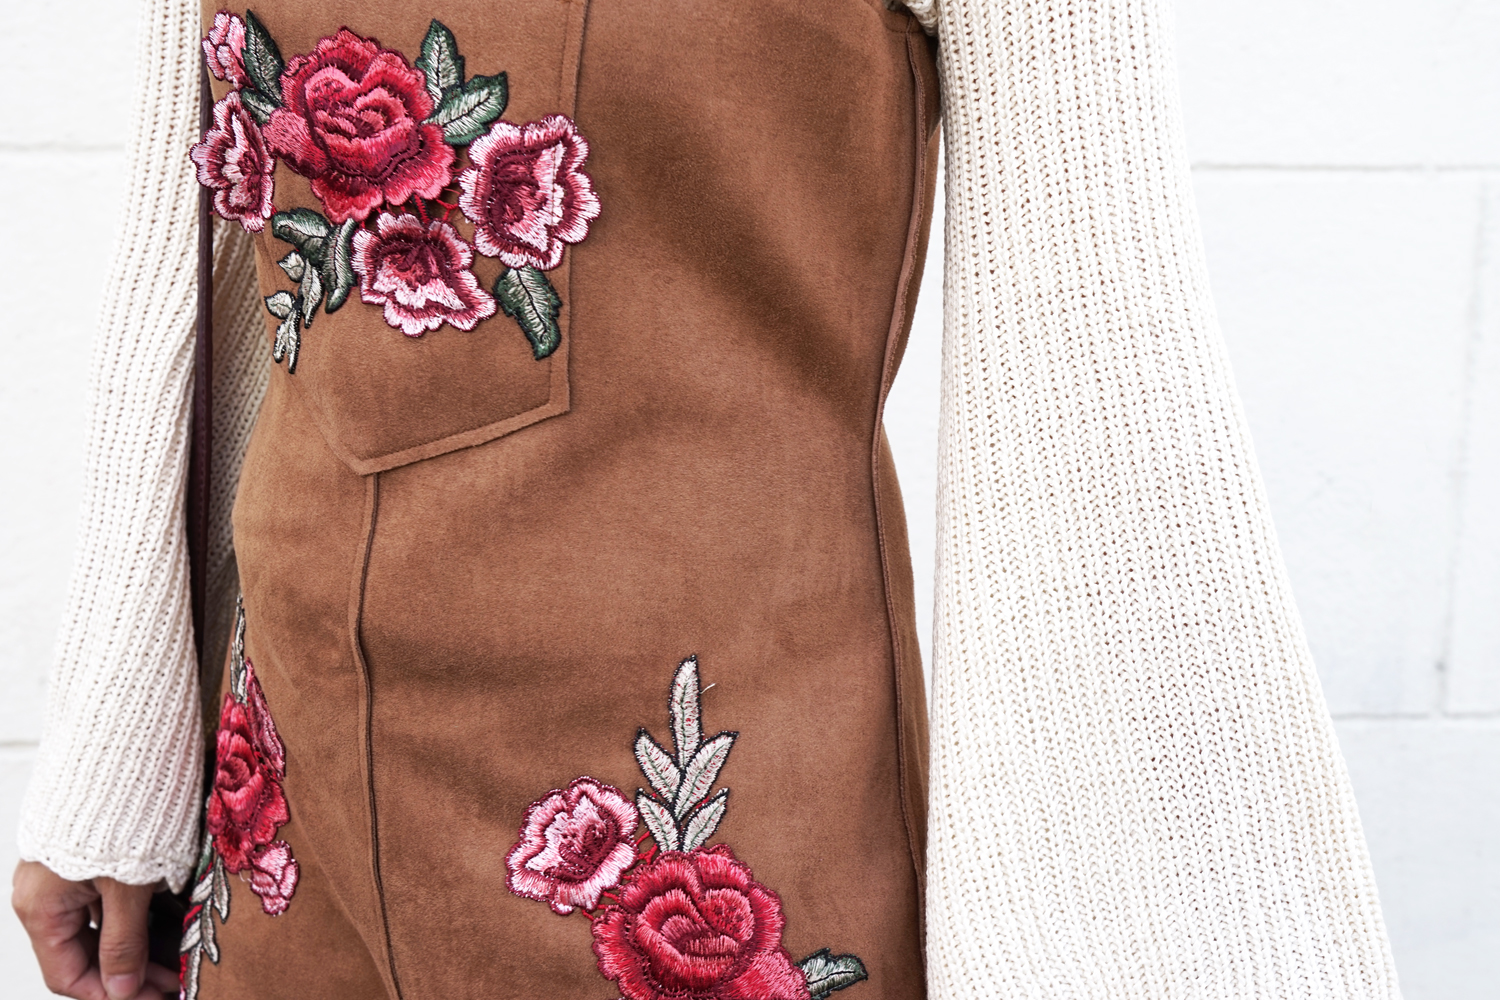 03suede-pinafore-floral-embroidery-knit-sweater-fall-fashion-style